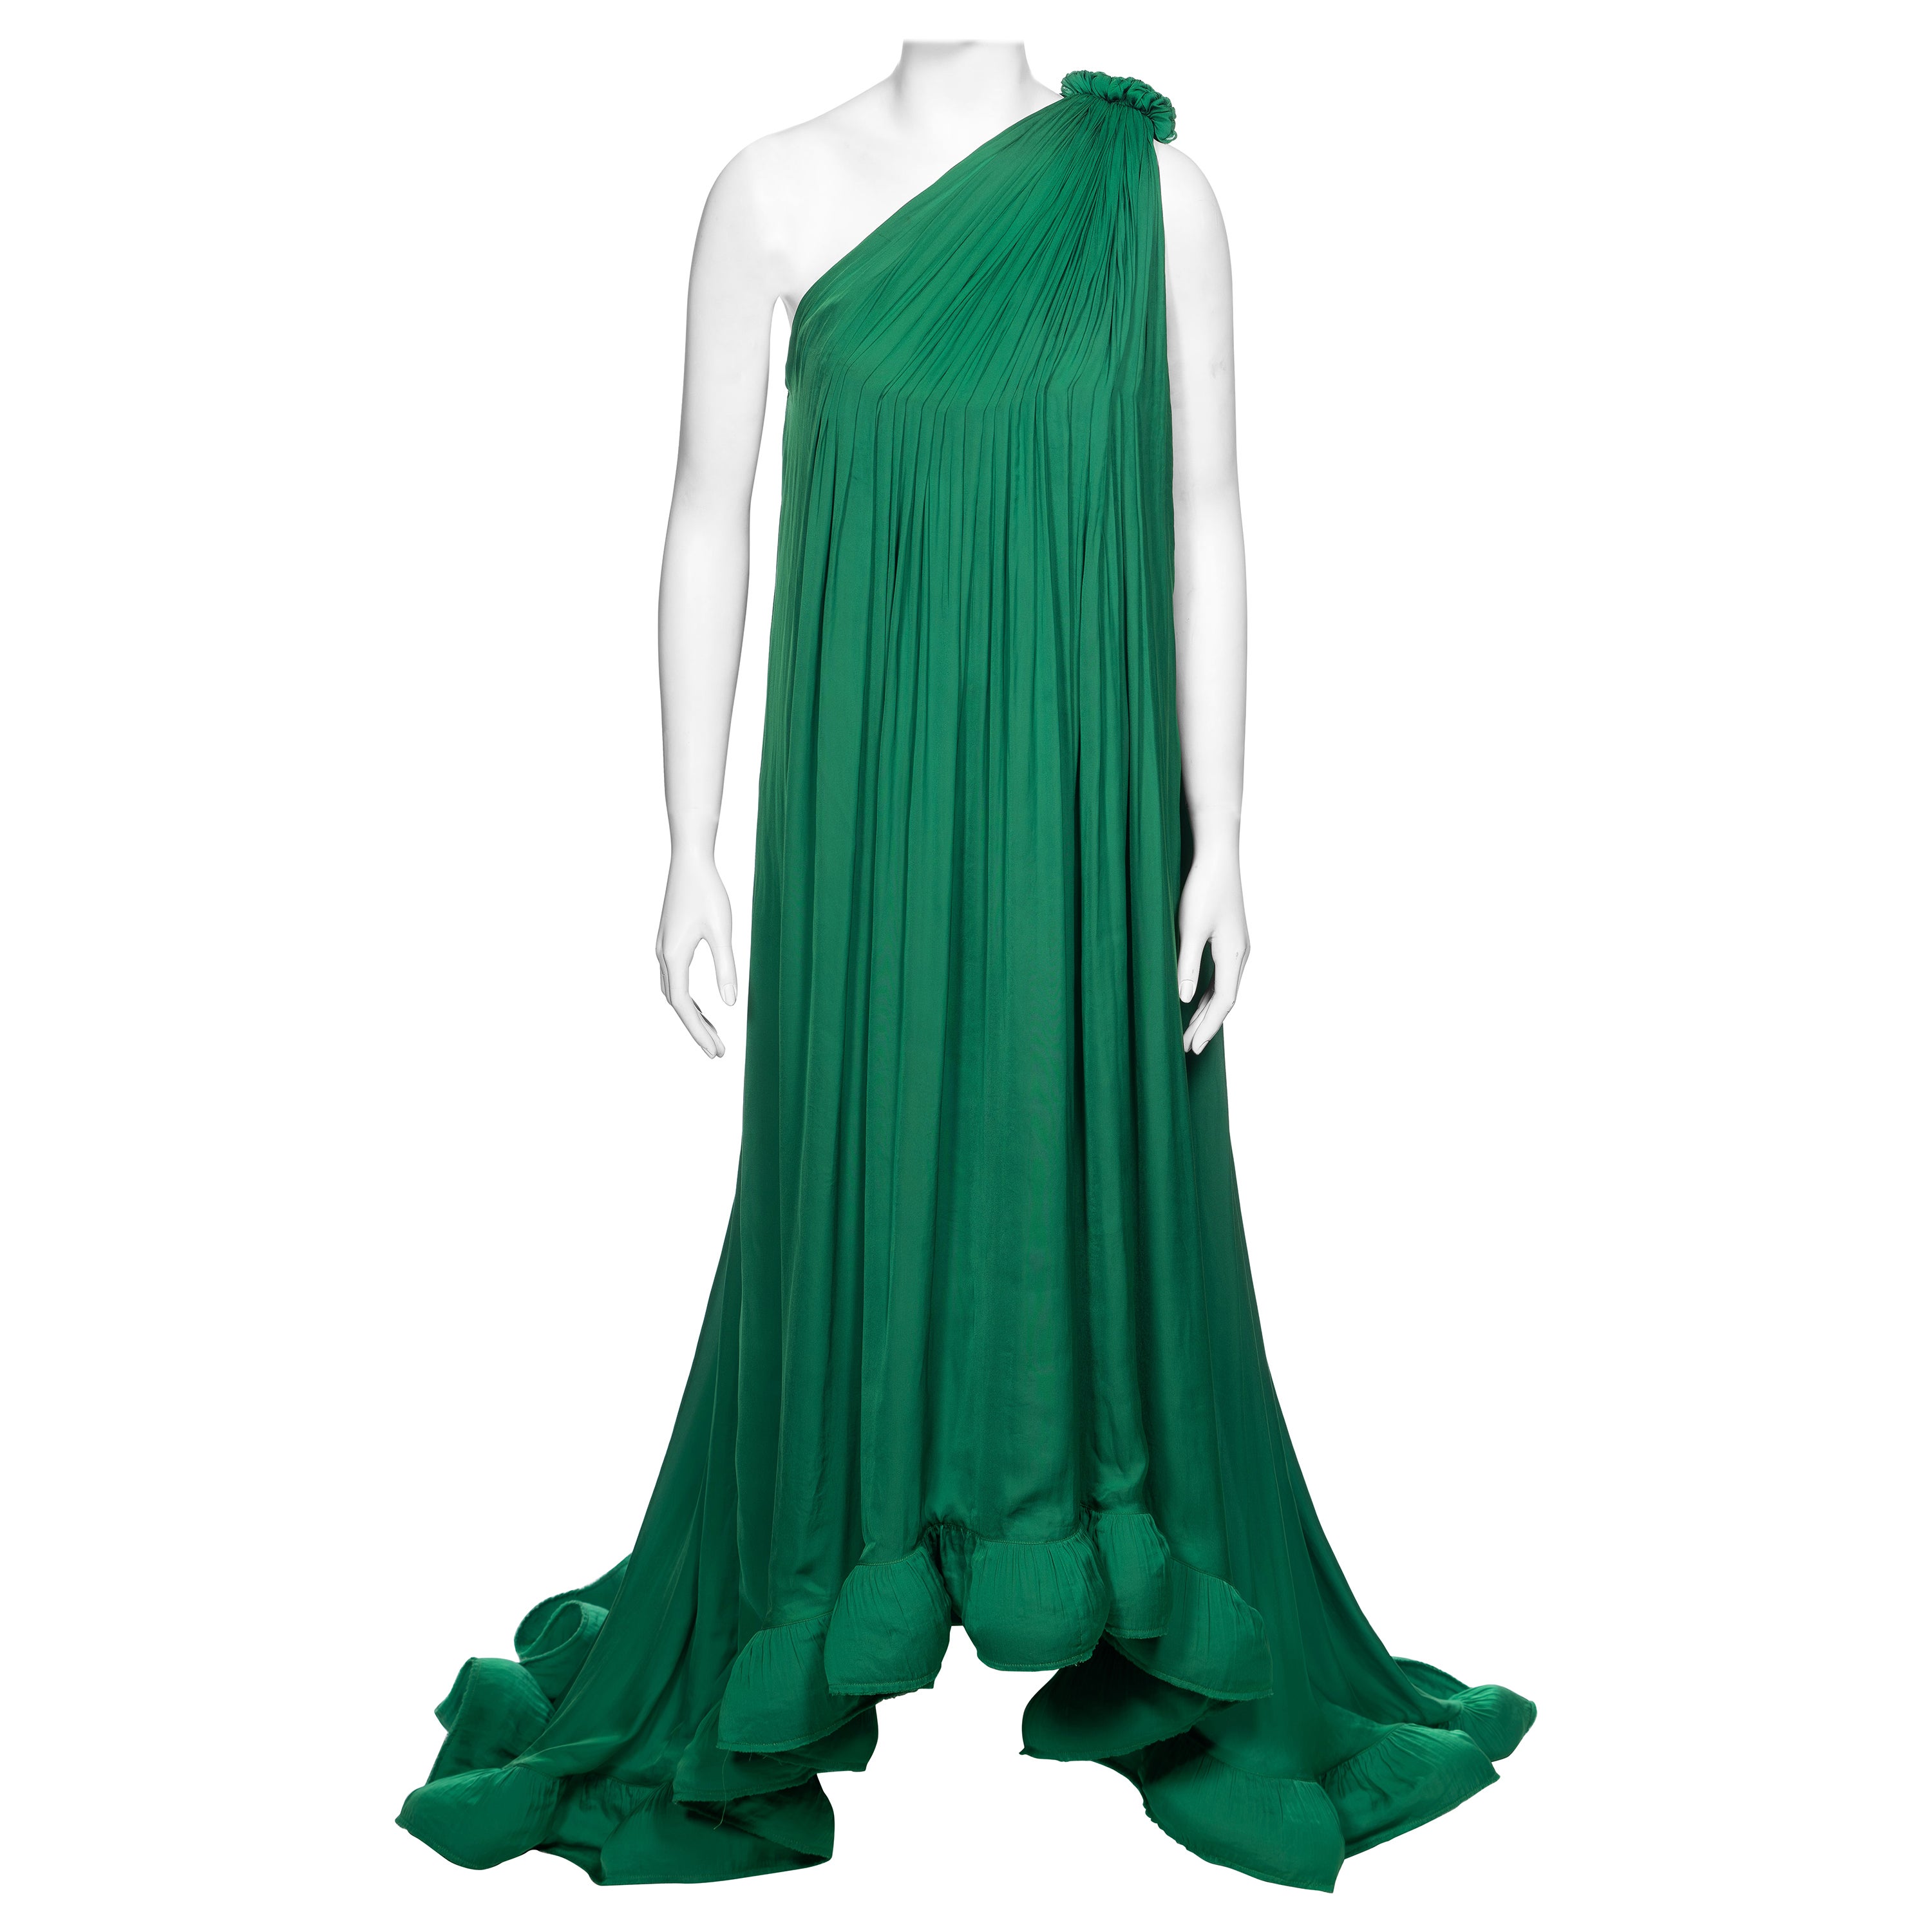 Lanvin by Alber Elbaz Green Pleated One-Shoulder Evening Dress, SS 2008 For Sale